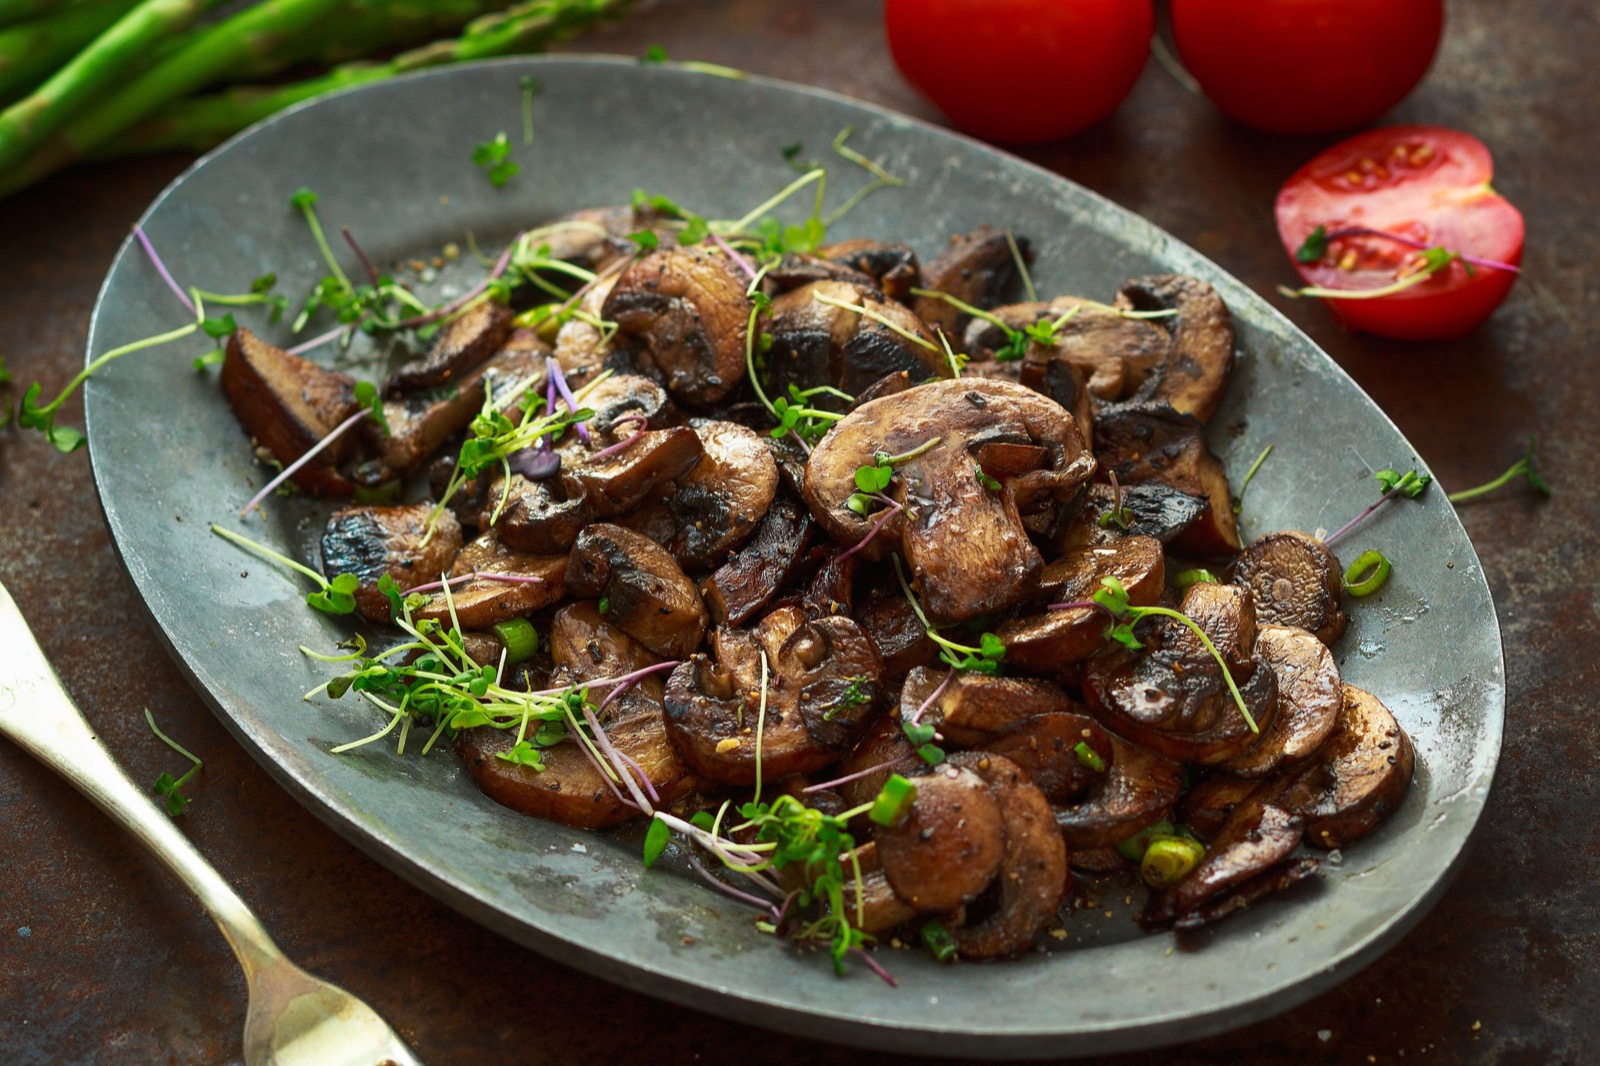 🍆 If You’ll Eat at Least 18/25 of These Vegetables, Then You’re Not a Picky Eater Sauteed mushrooms